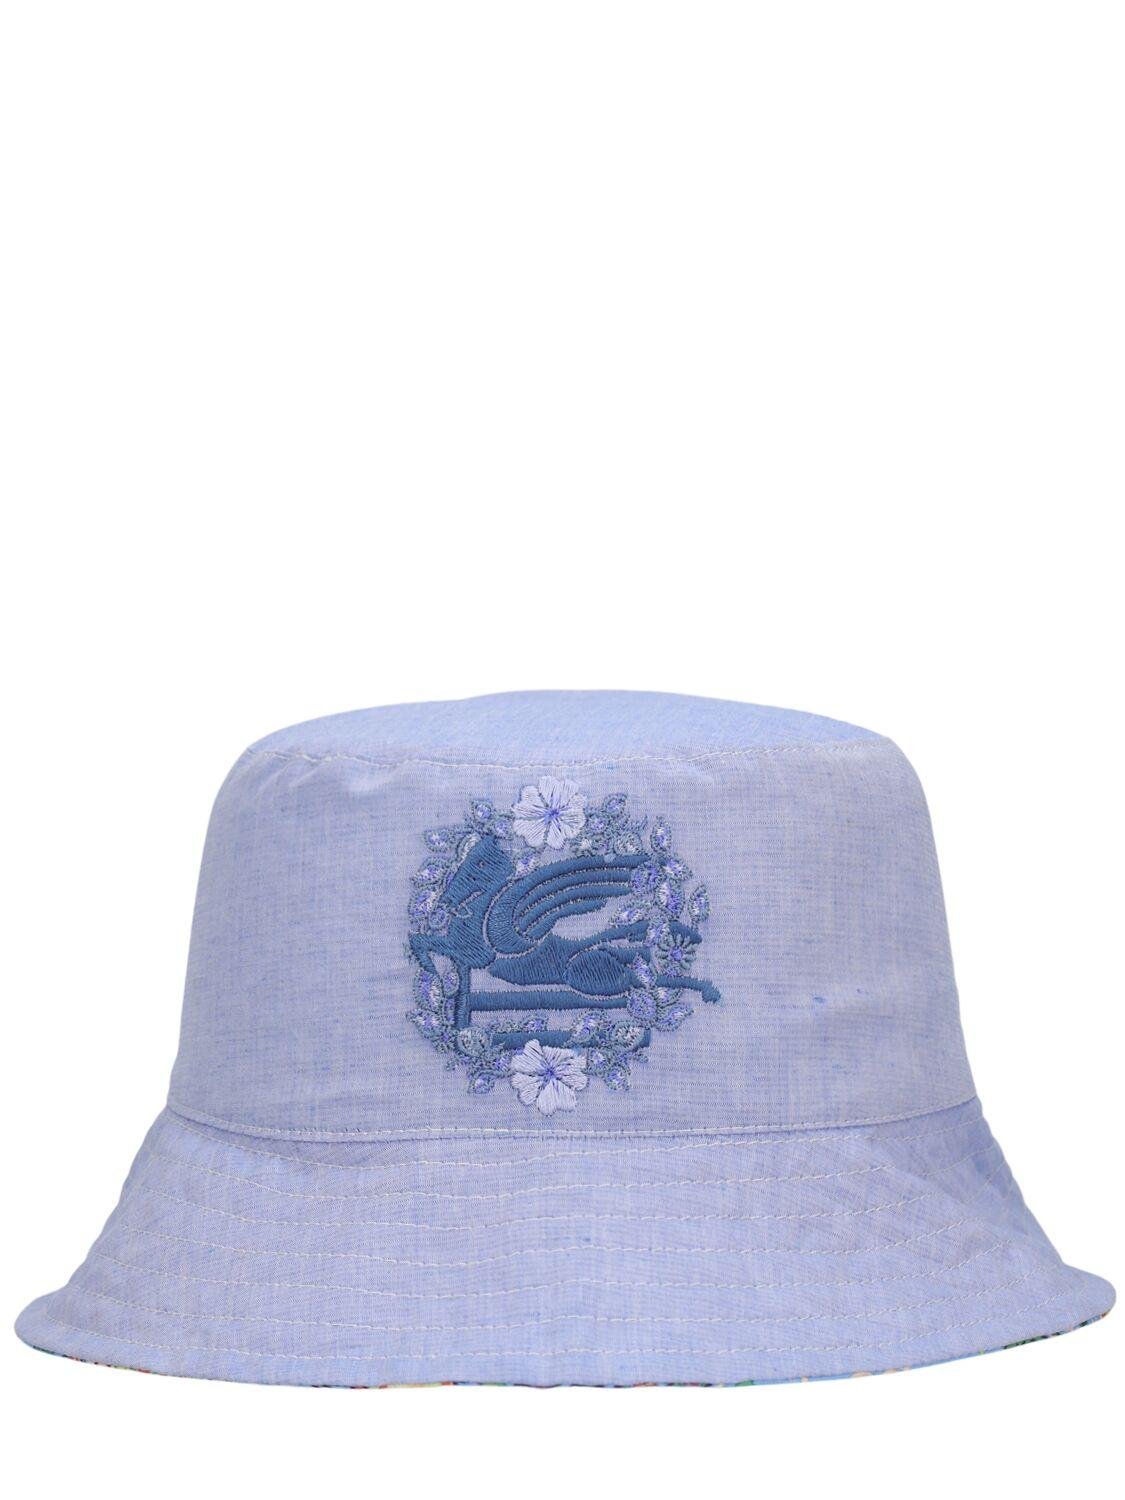 Printed Cotton & Linen Bucket Hat by ETRO